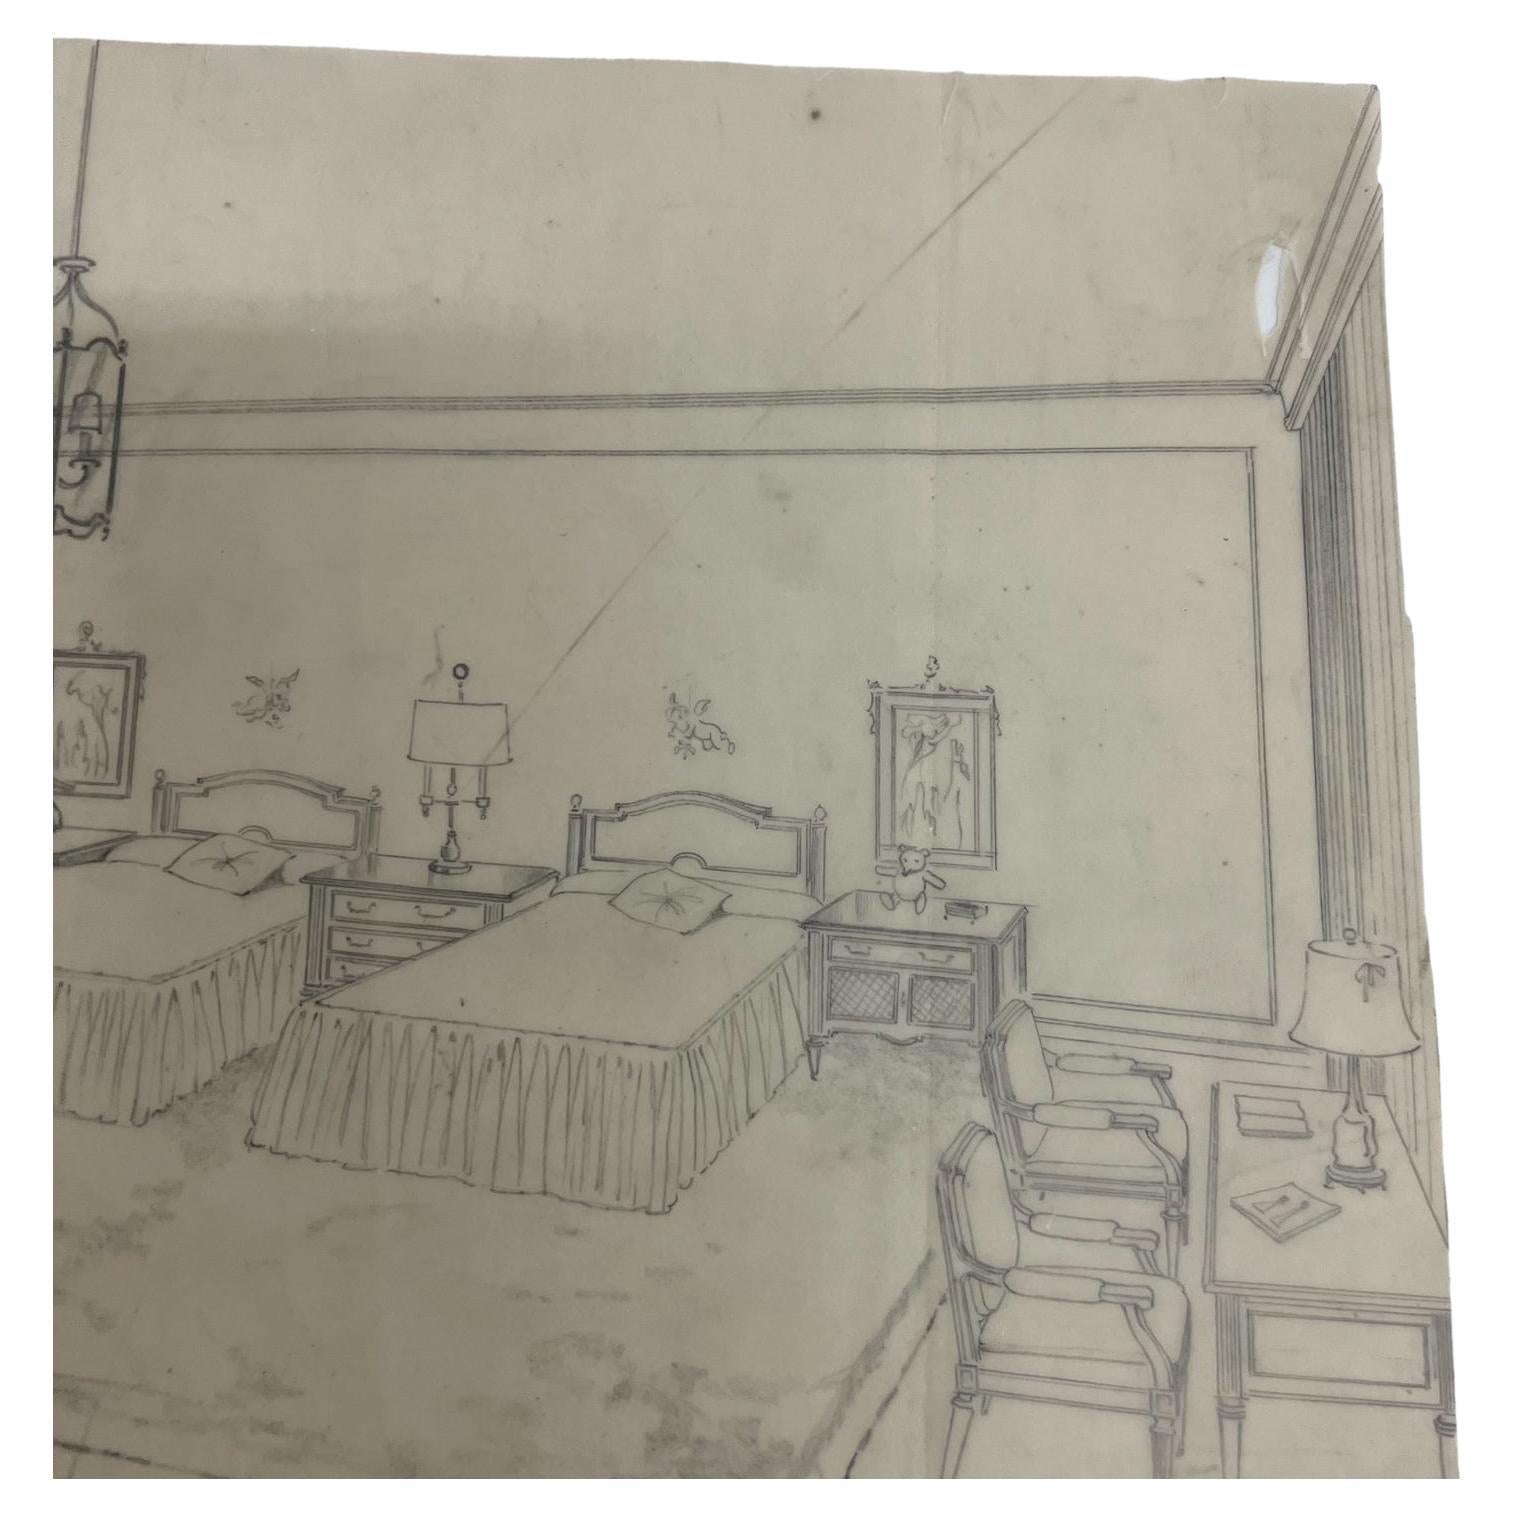 Mid 20th century Mario Pani sketch guest bedroom suite Alfombra
Interior Design Decor.
Signed art architect Mario Pani.
15 x 10.25.
Preowned original vintage art sketch drawing.
See images provided.
 